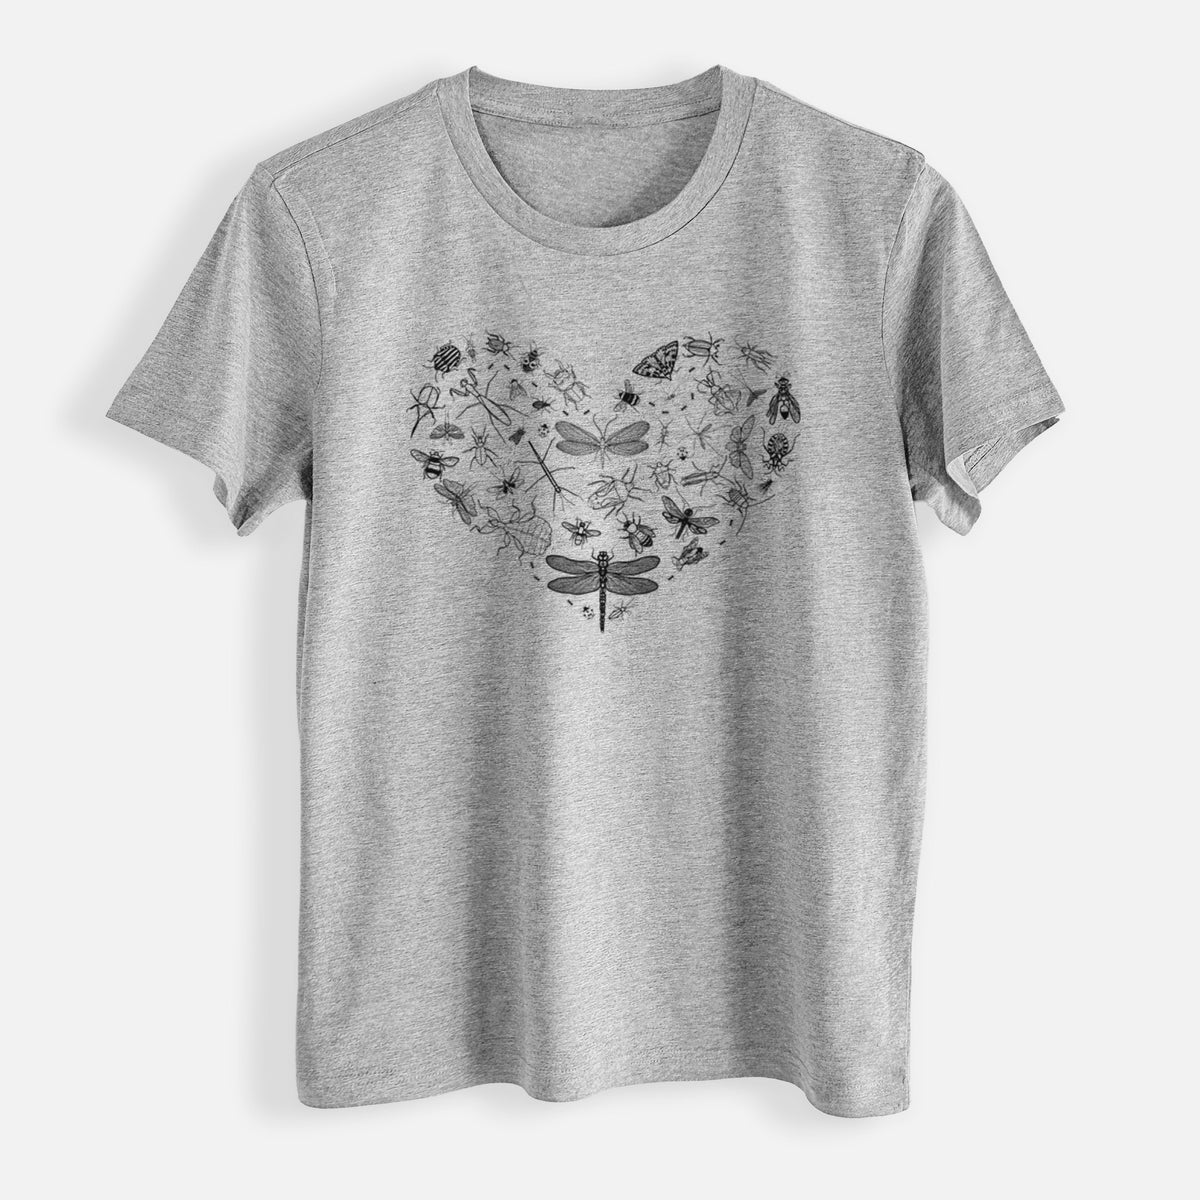 Heart Full of Insects - Womens Everyday Maple Tee